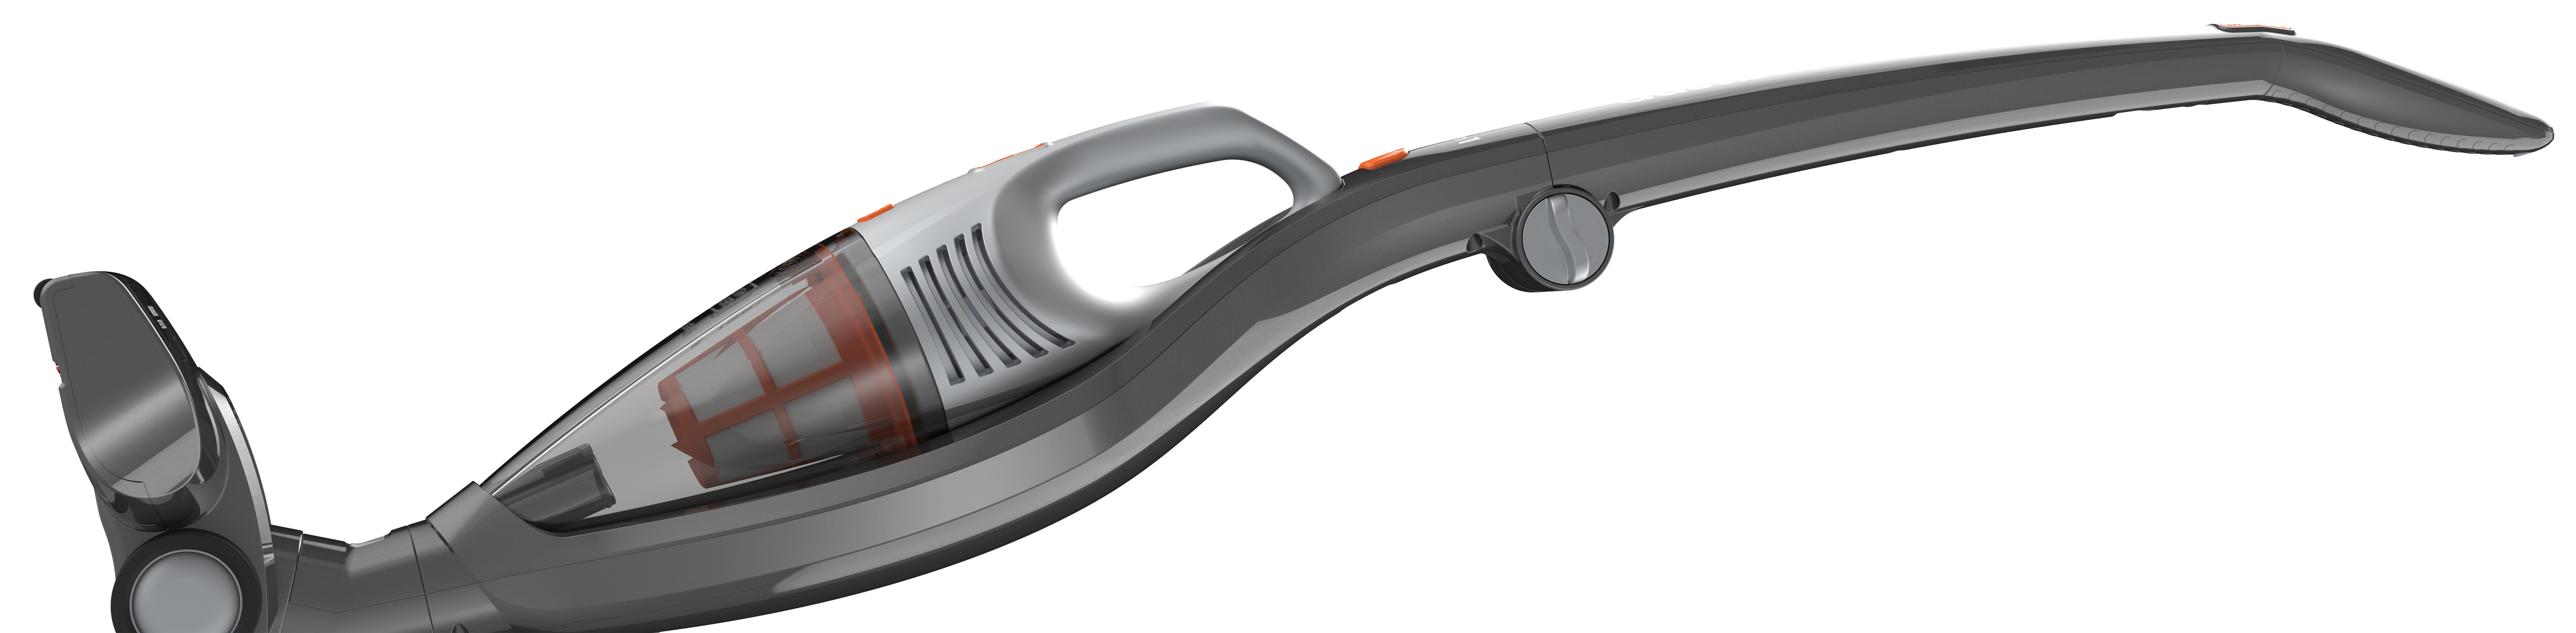  BLACK+DECKER 20V MAX POWERCONNECT Handheld Vacuum, Cordless,  Battery Not Included, Bare Tool Only (BCHV001B), Gray : Everything Else